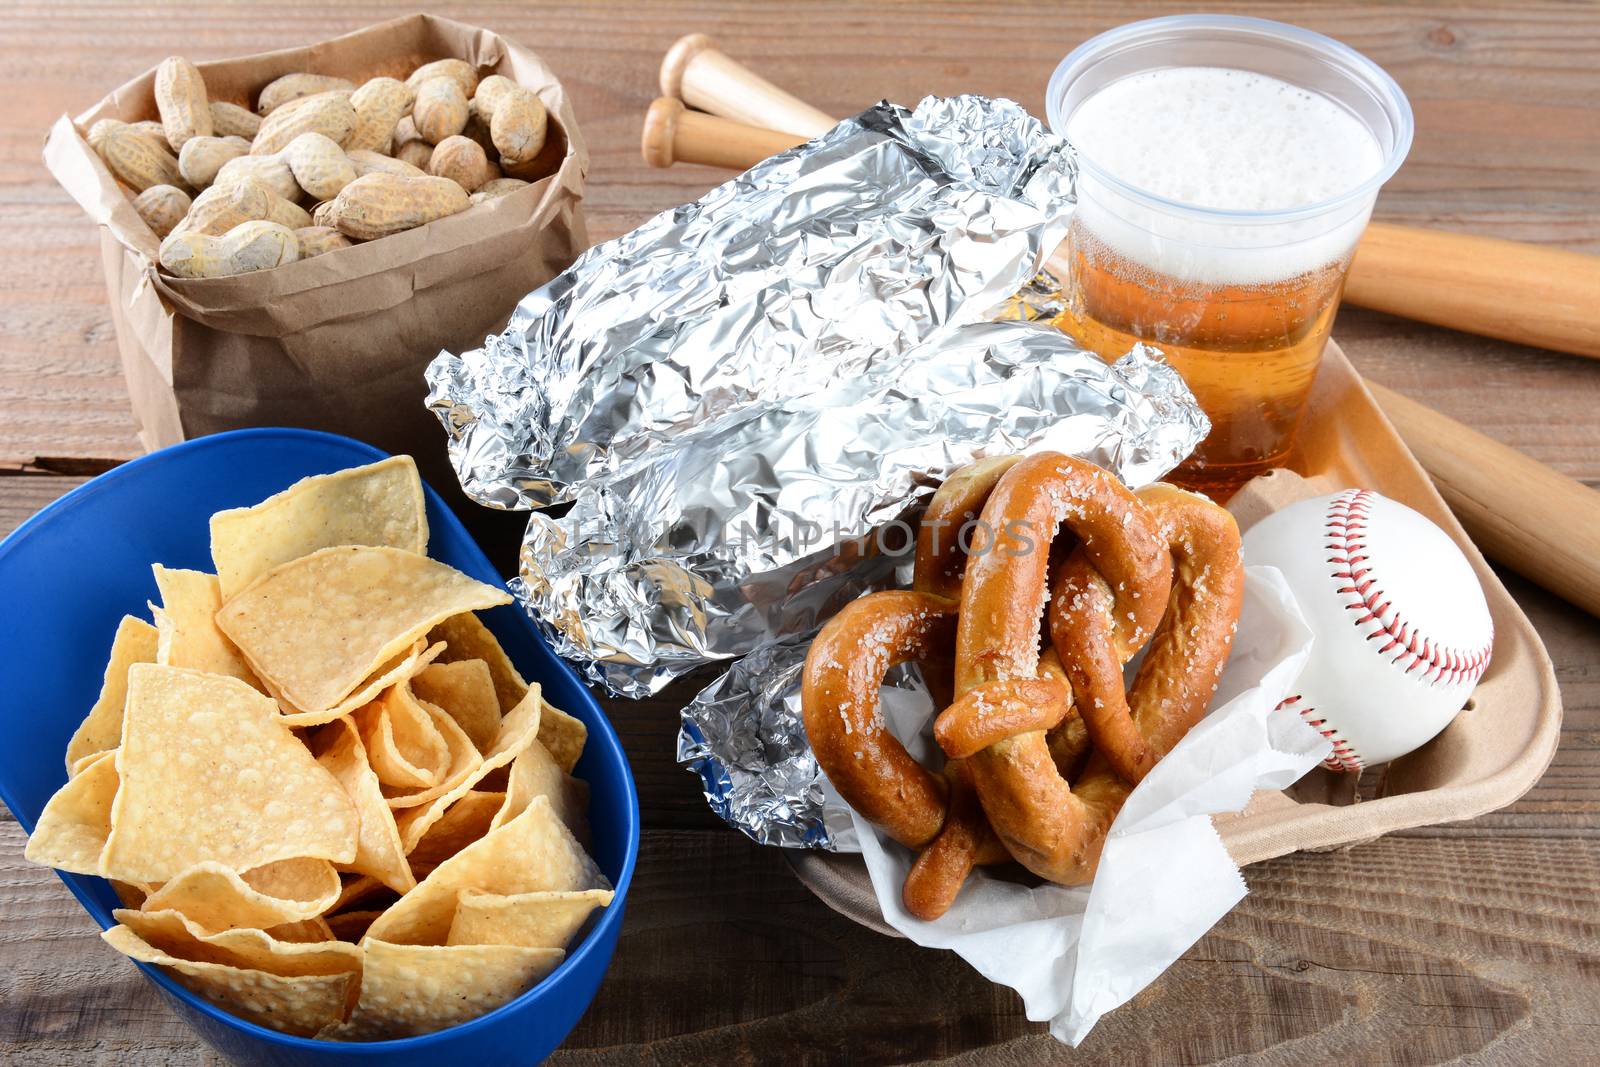 Closeup of a tray of food and souvenirs that one would find at a baseball game. Items include, hot dogs wrapped in foil, beer, peanuts, chips, baseball, mini bats and pretzels. Horizontal format.